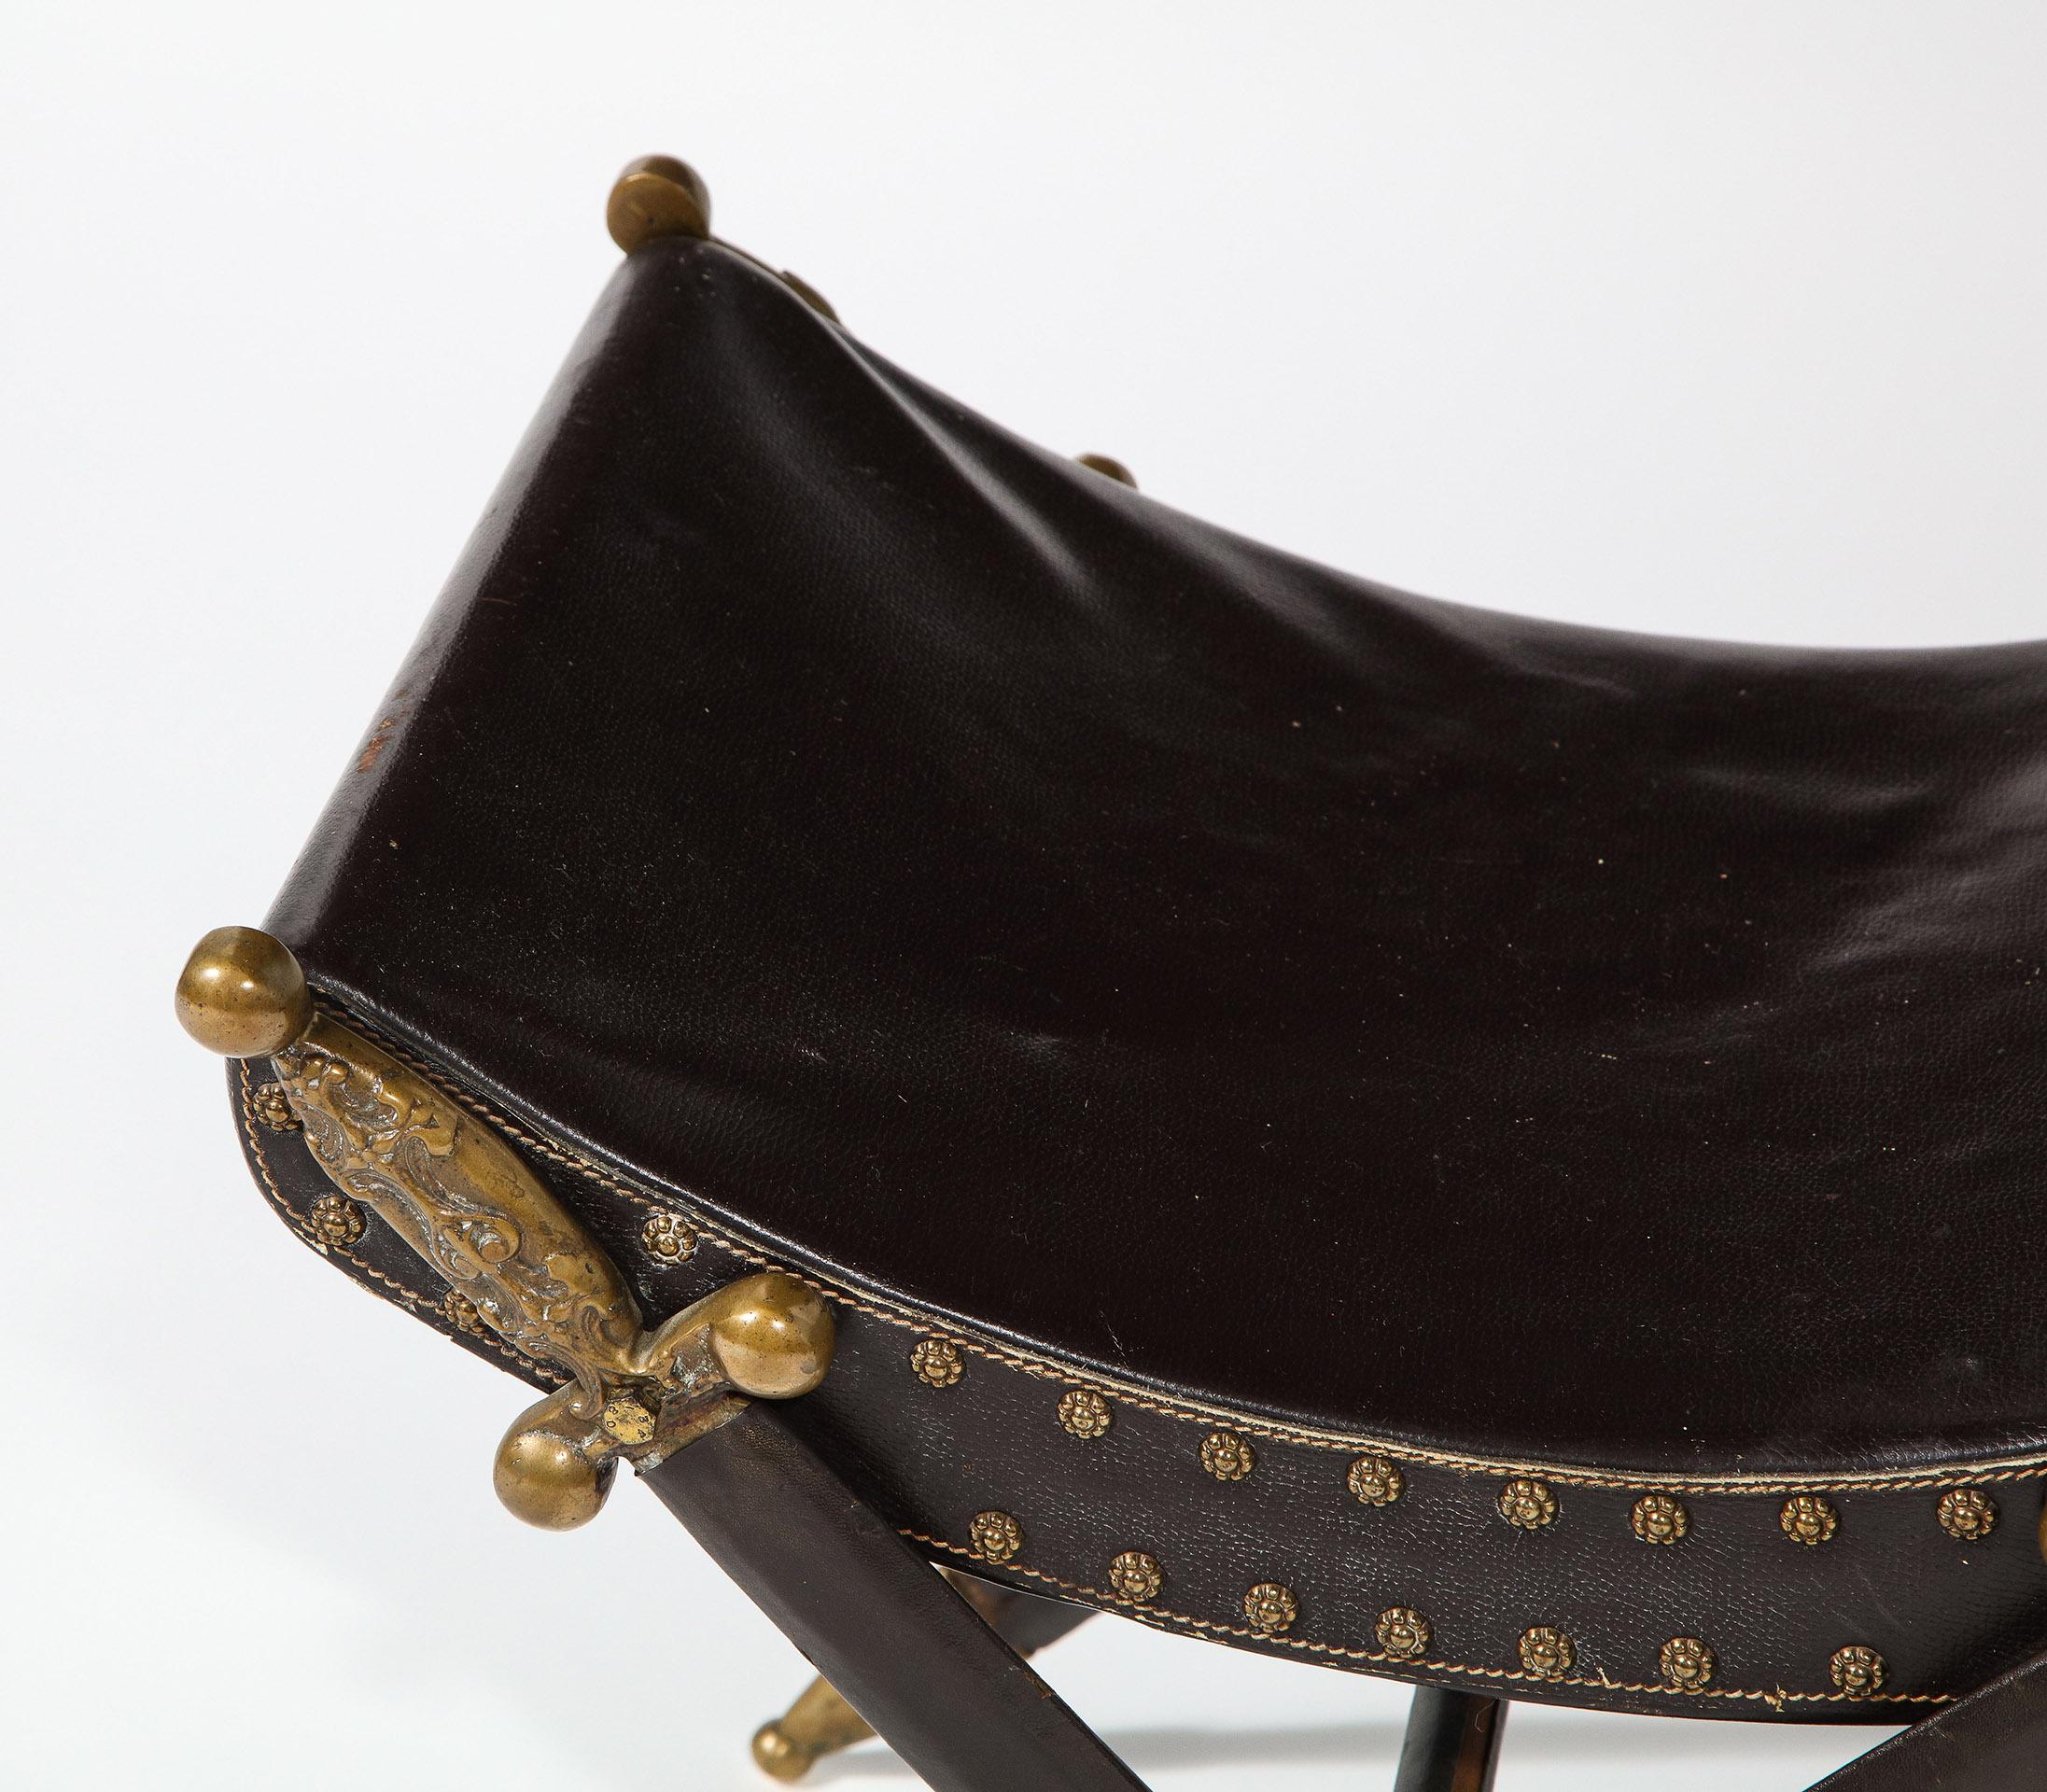 20th Century French Neoclassical Steel, Brass, and Leather Crossed Swords Bench